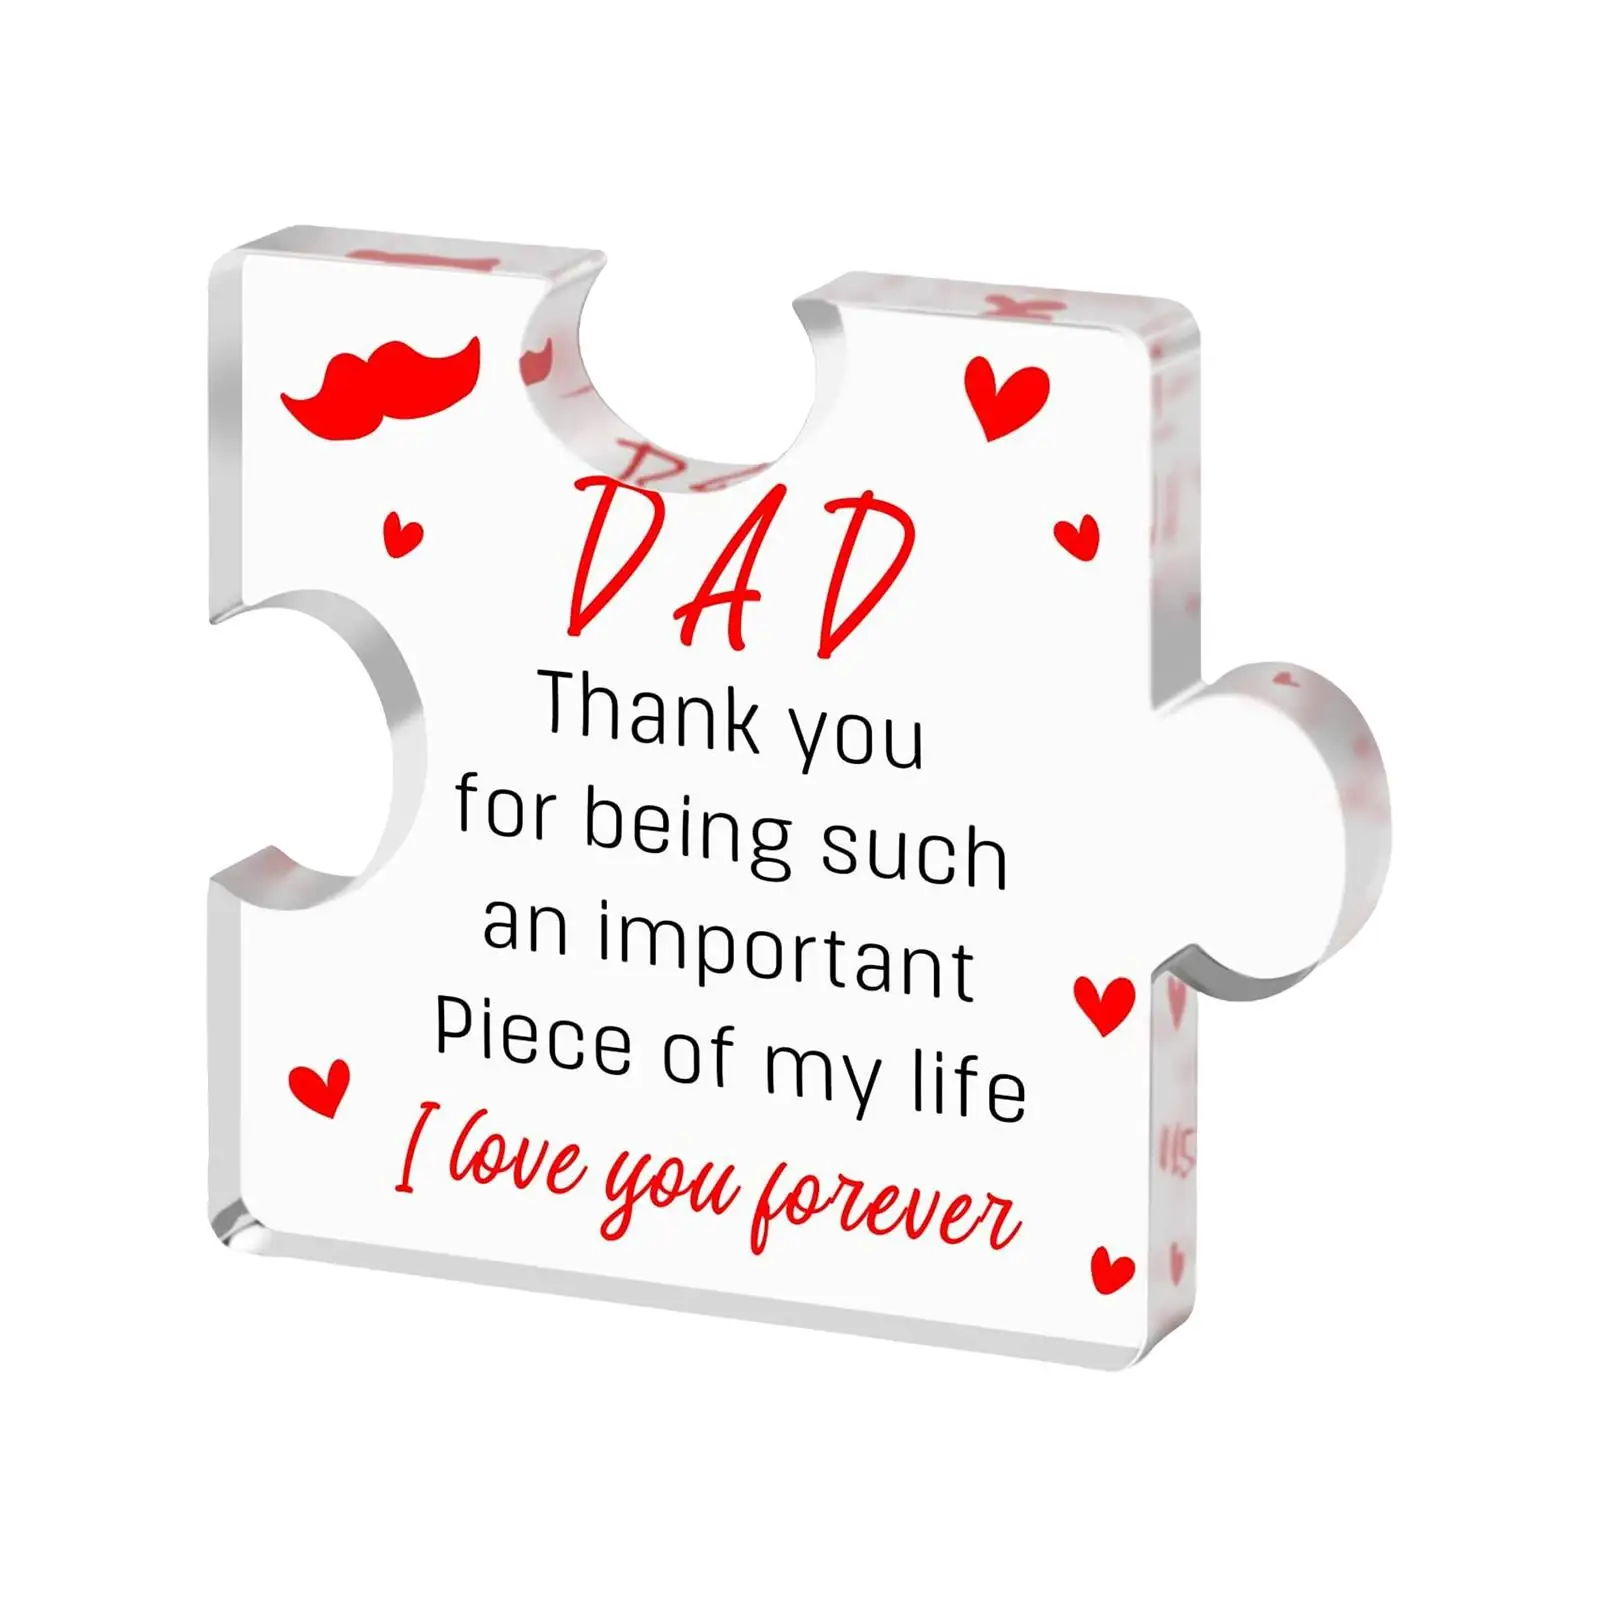 Fathers Day Present Desk Decorations Cool Dad Presents Heartwarming Acrylic Block Puzzle Birthday Gifts for Papa from Sons